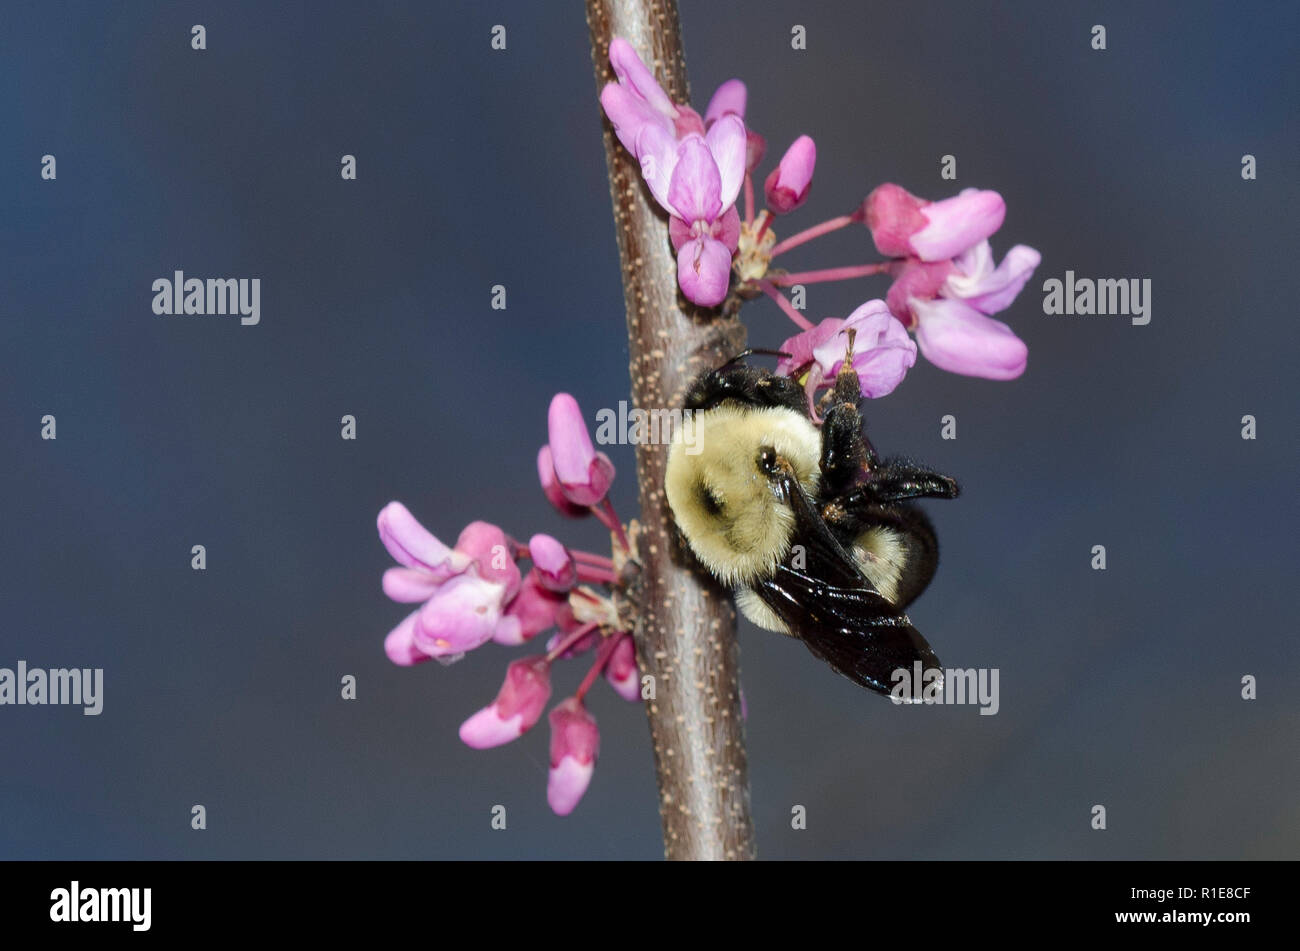 Brown-belted Bumble Bee, Bombus griseocollis, on Eastern Redbud, Cercis canadensis Stock Photo